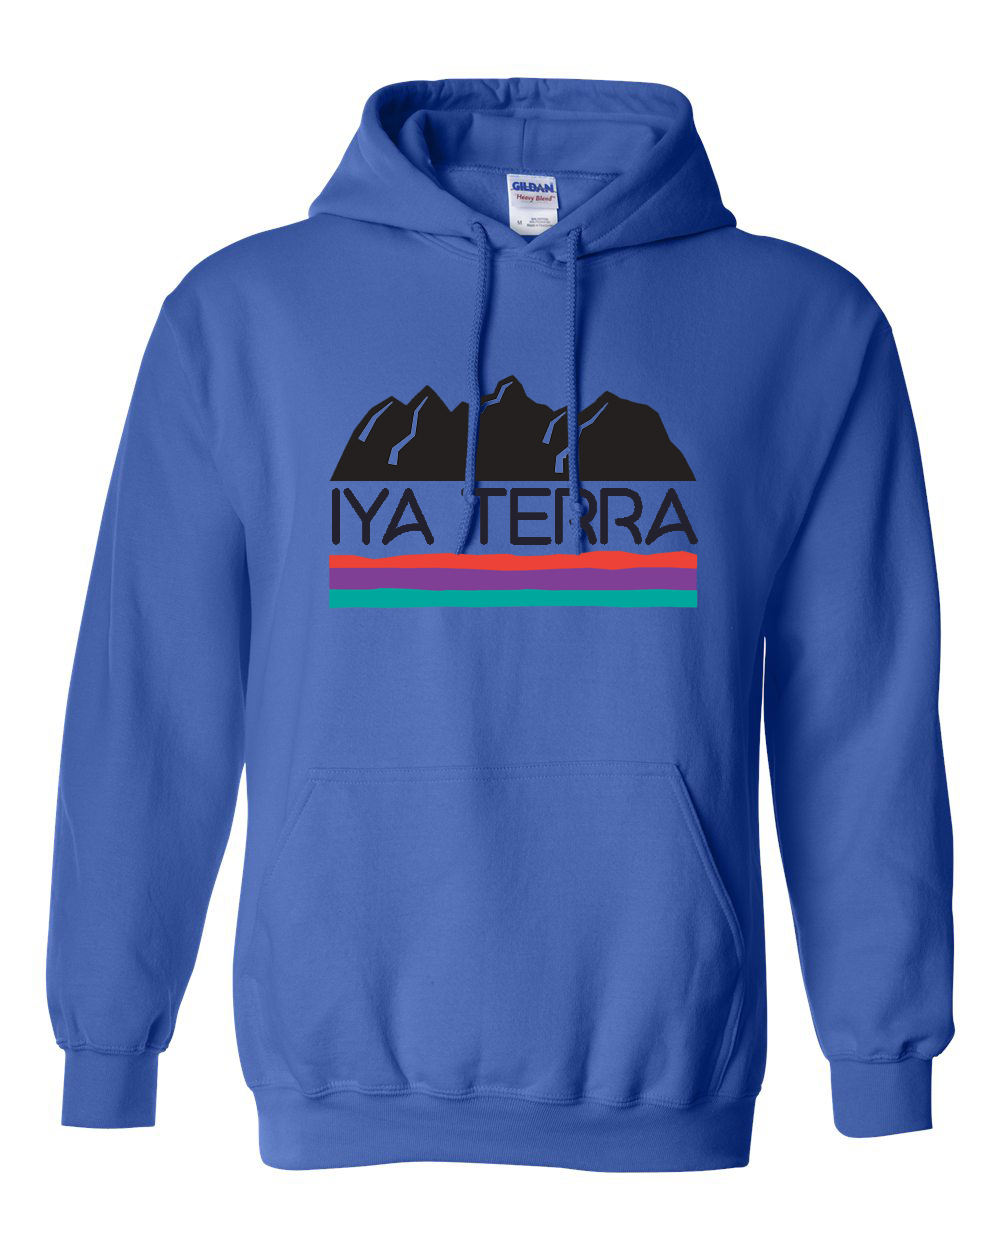 Mountain Pullover Hoodie (Royal Blue)